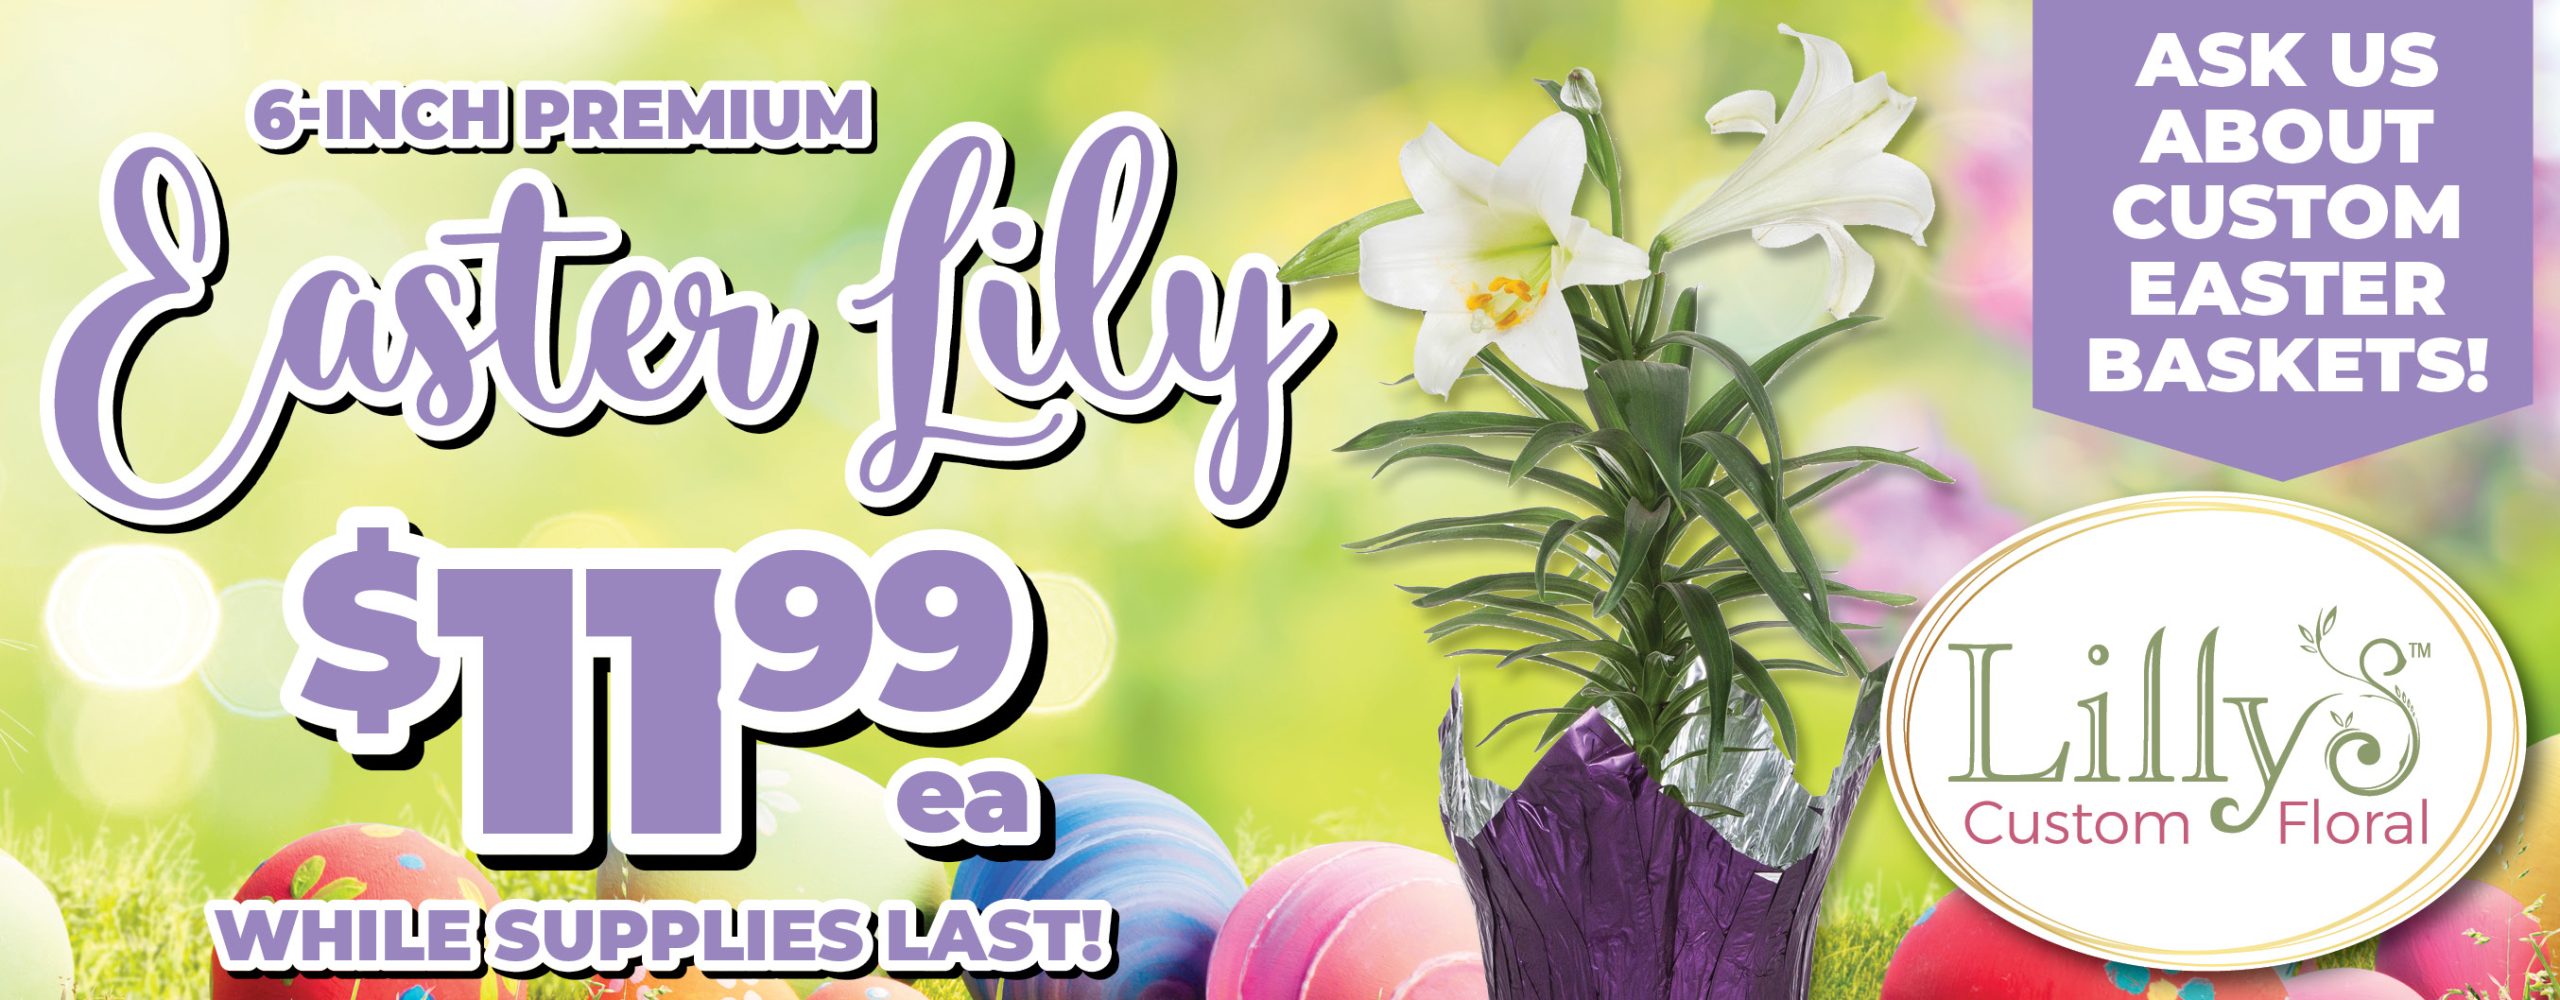 LillysCustomFloral_EasterLily